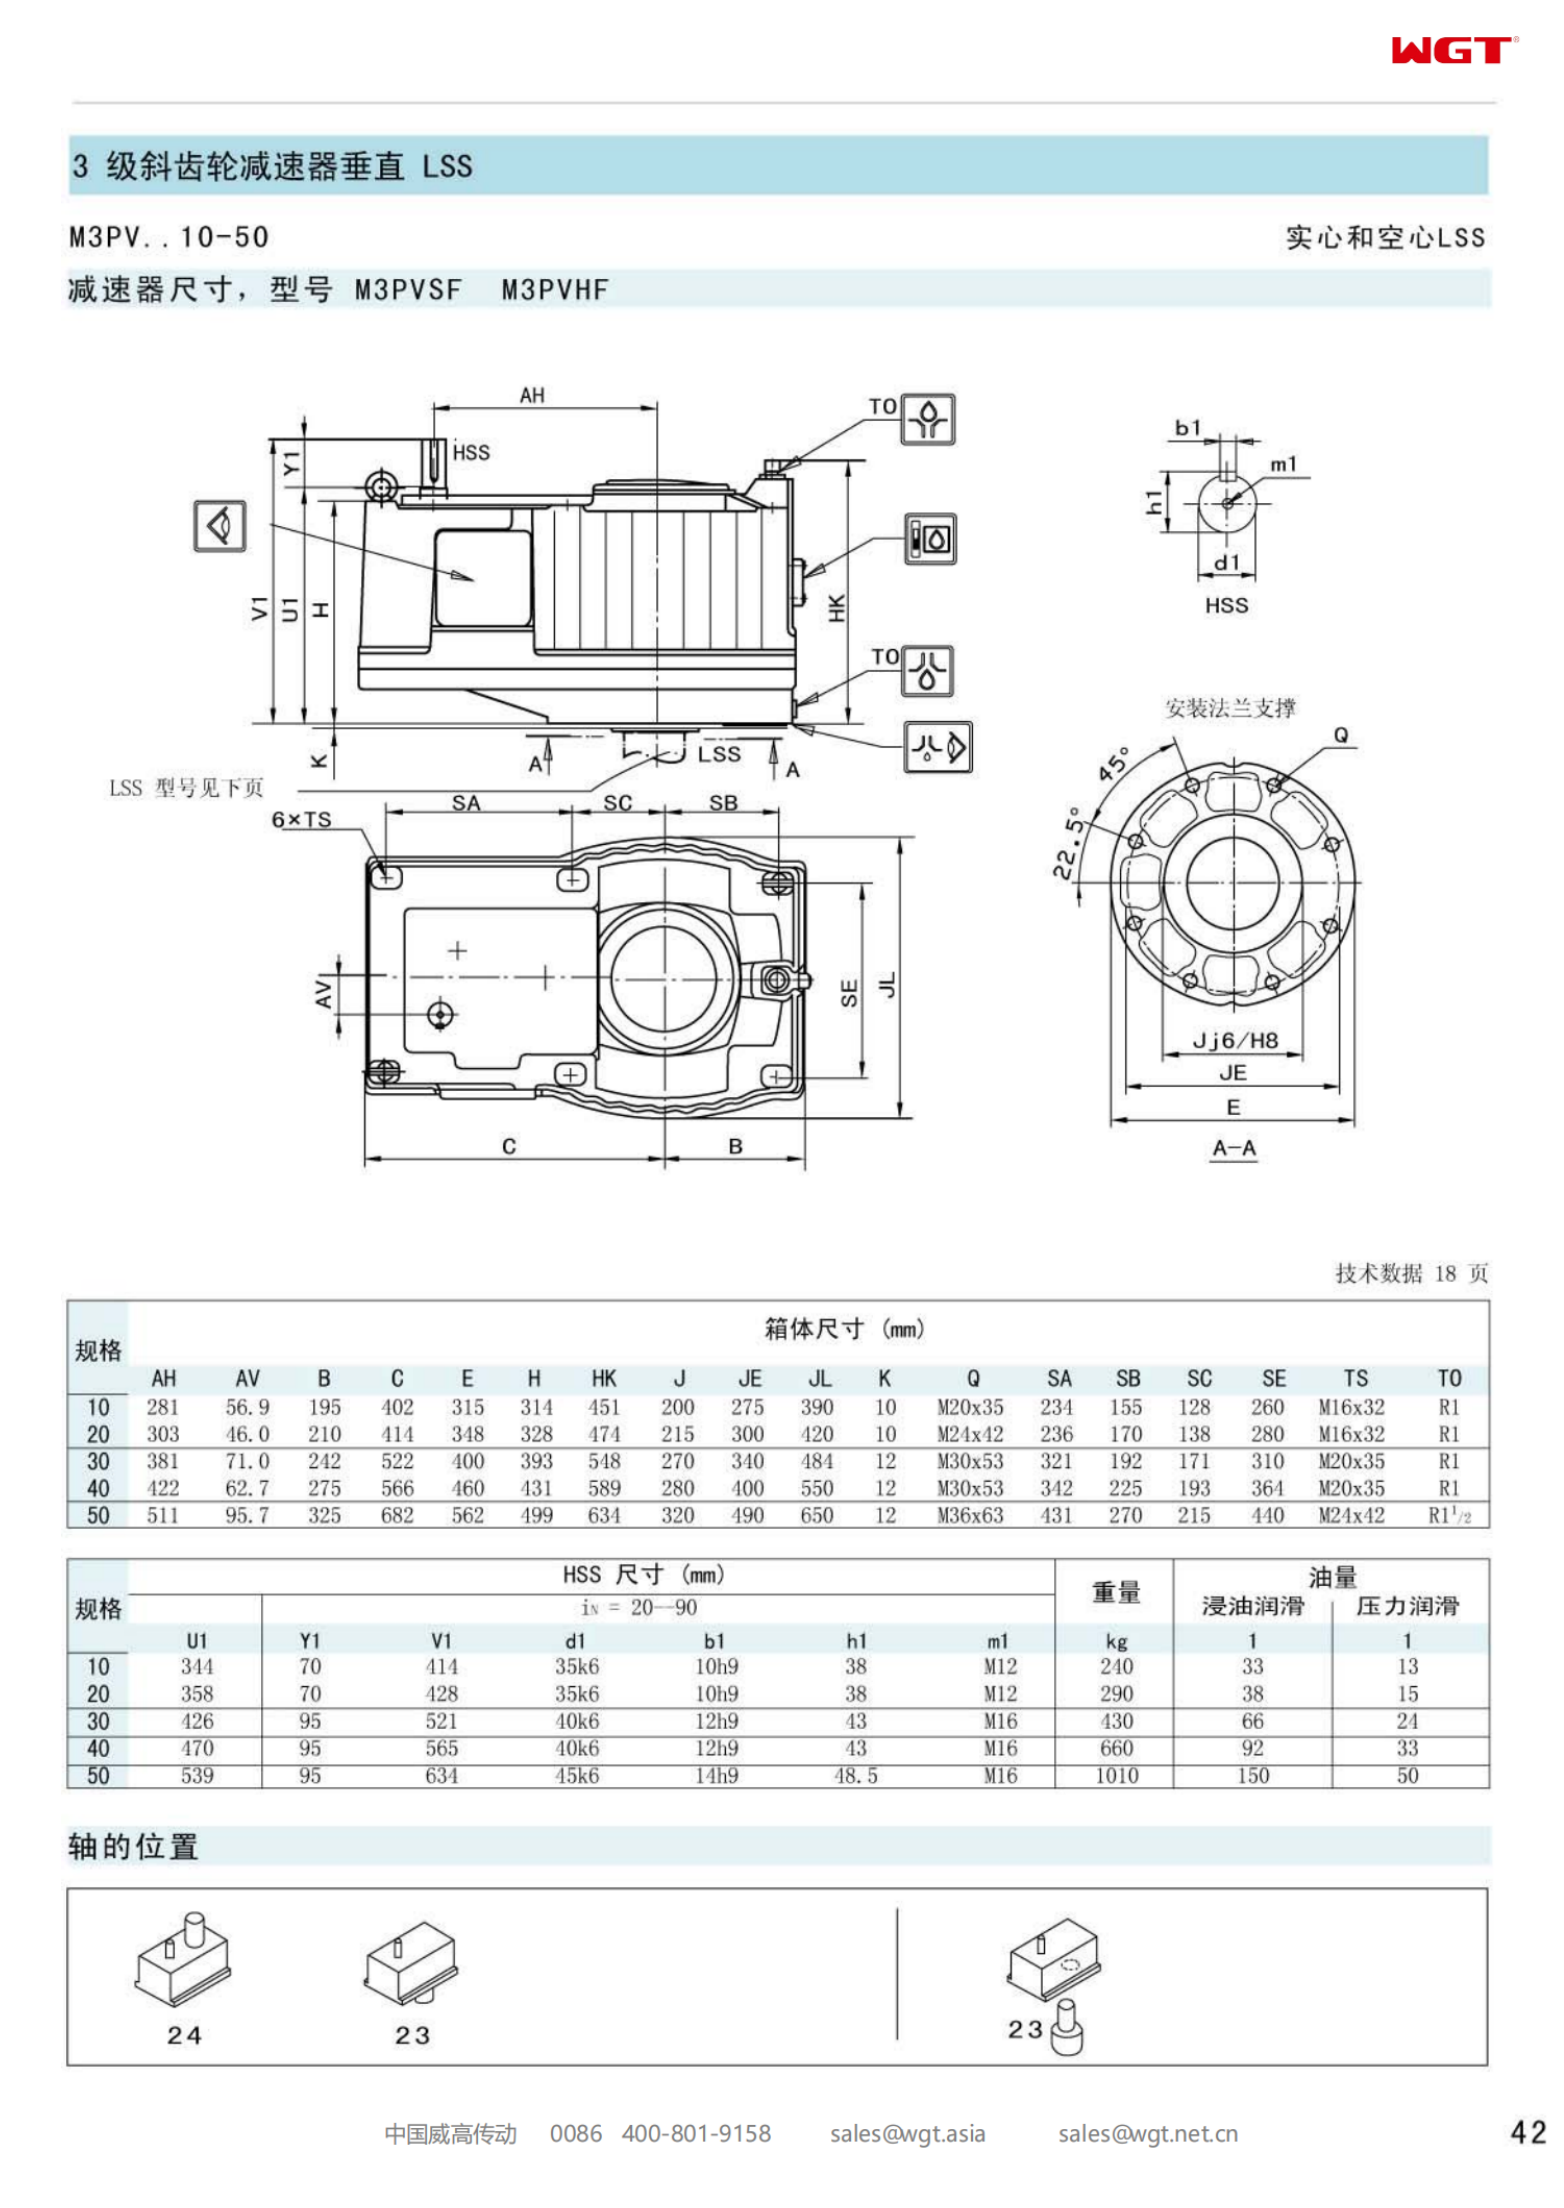 M3PVHF50 Replace_SEW_M_Series Gearbox